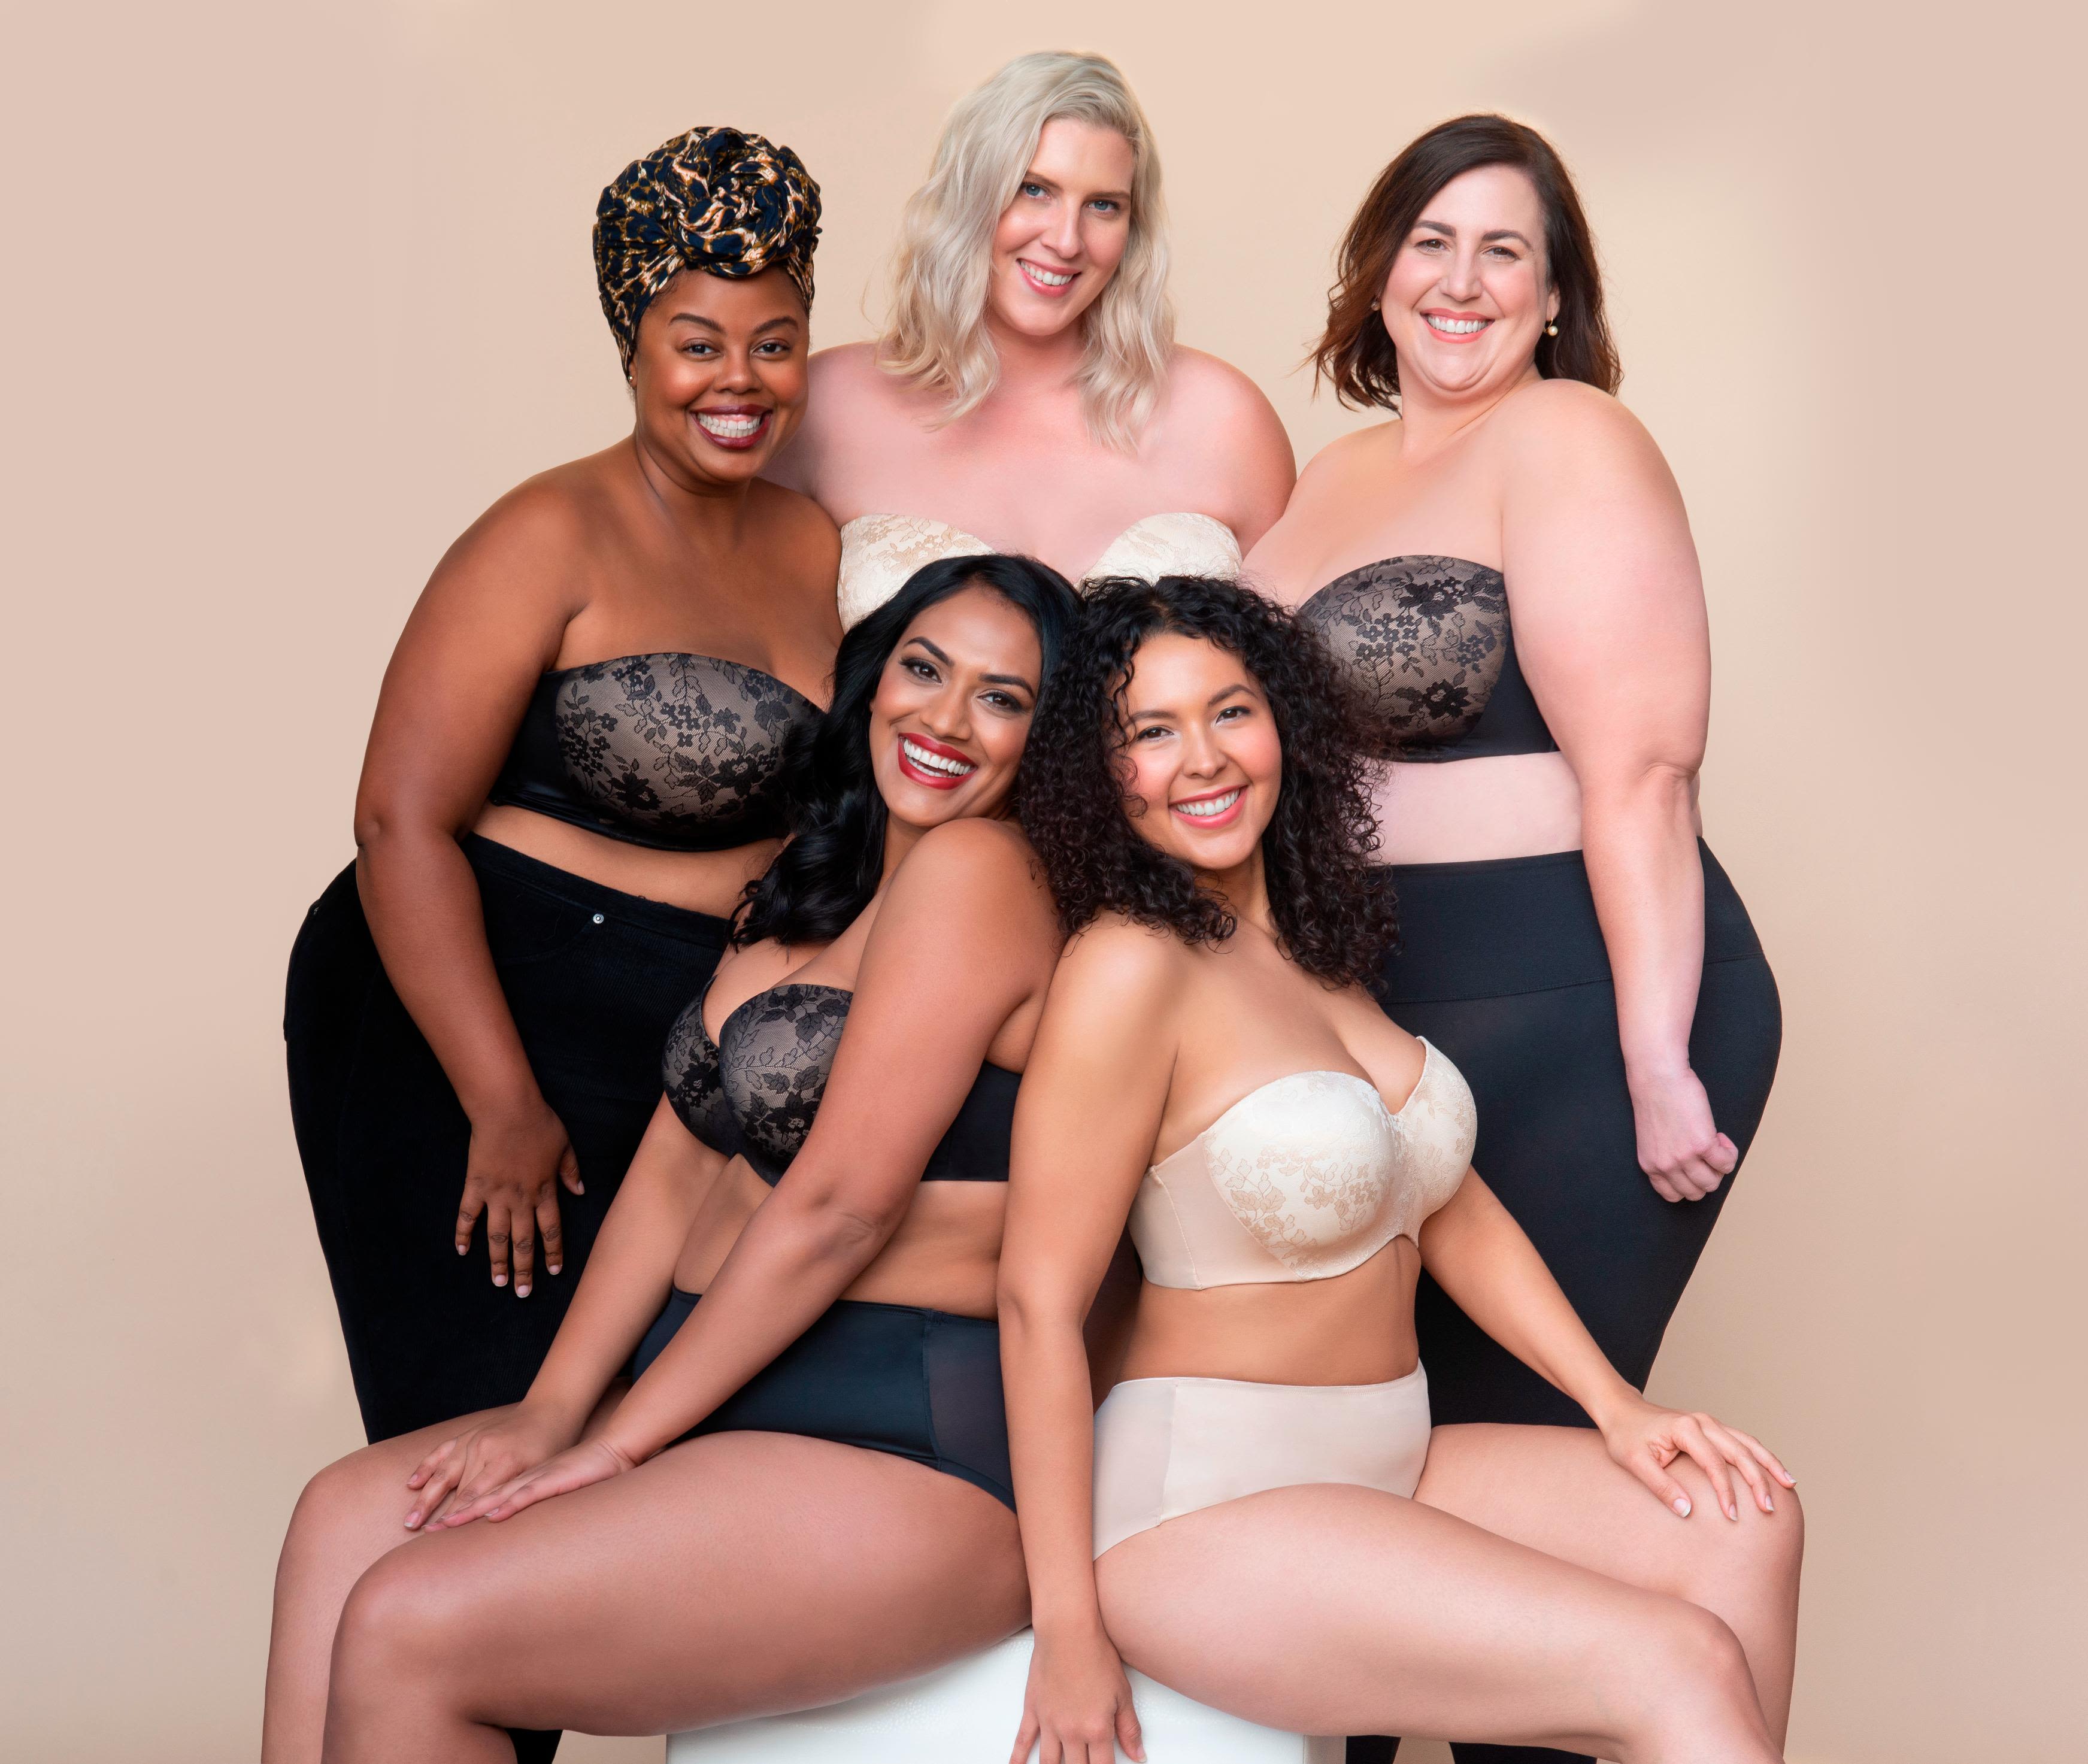 These Size-Inclusive Lingerie Brands Are So Hot, They Should Come